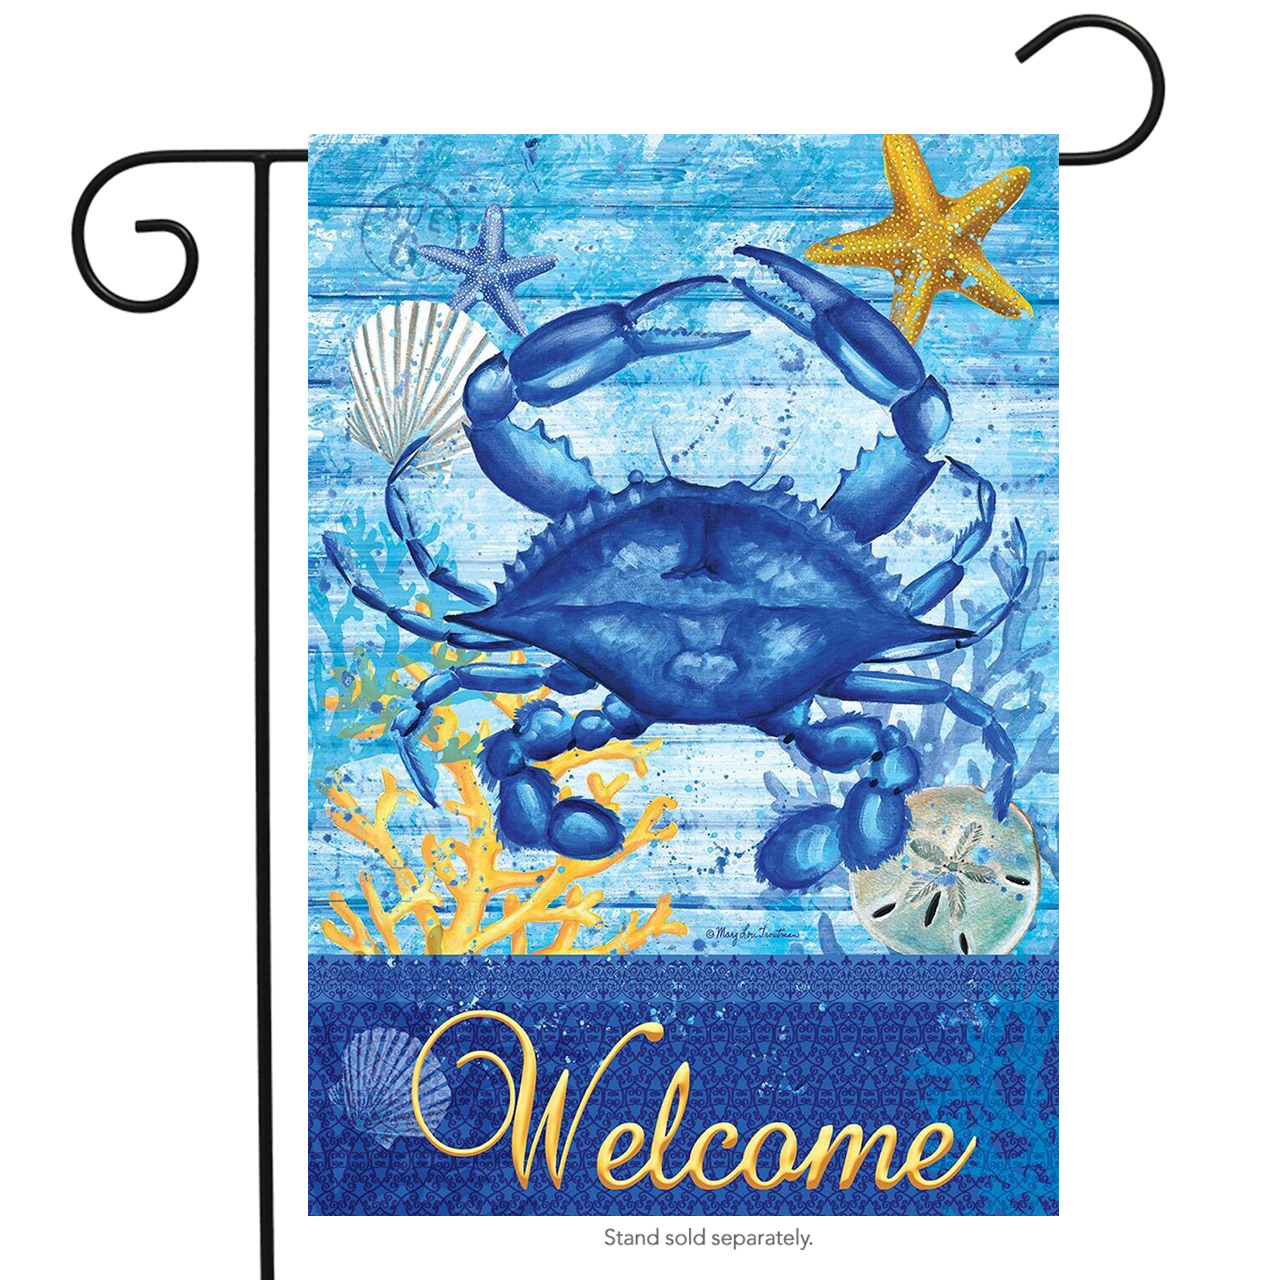 Animals & Critters Garden Flags for sale - Briarwood Lane™